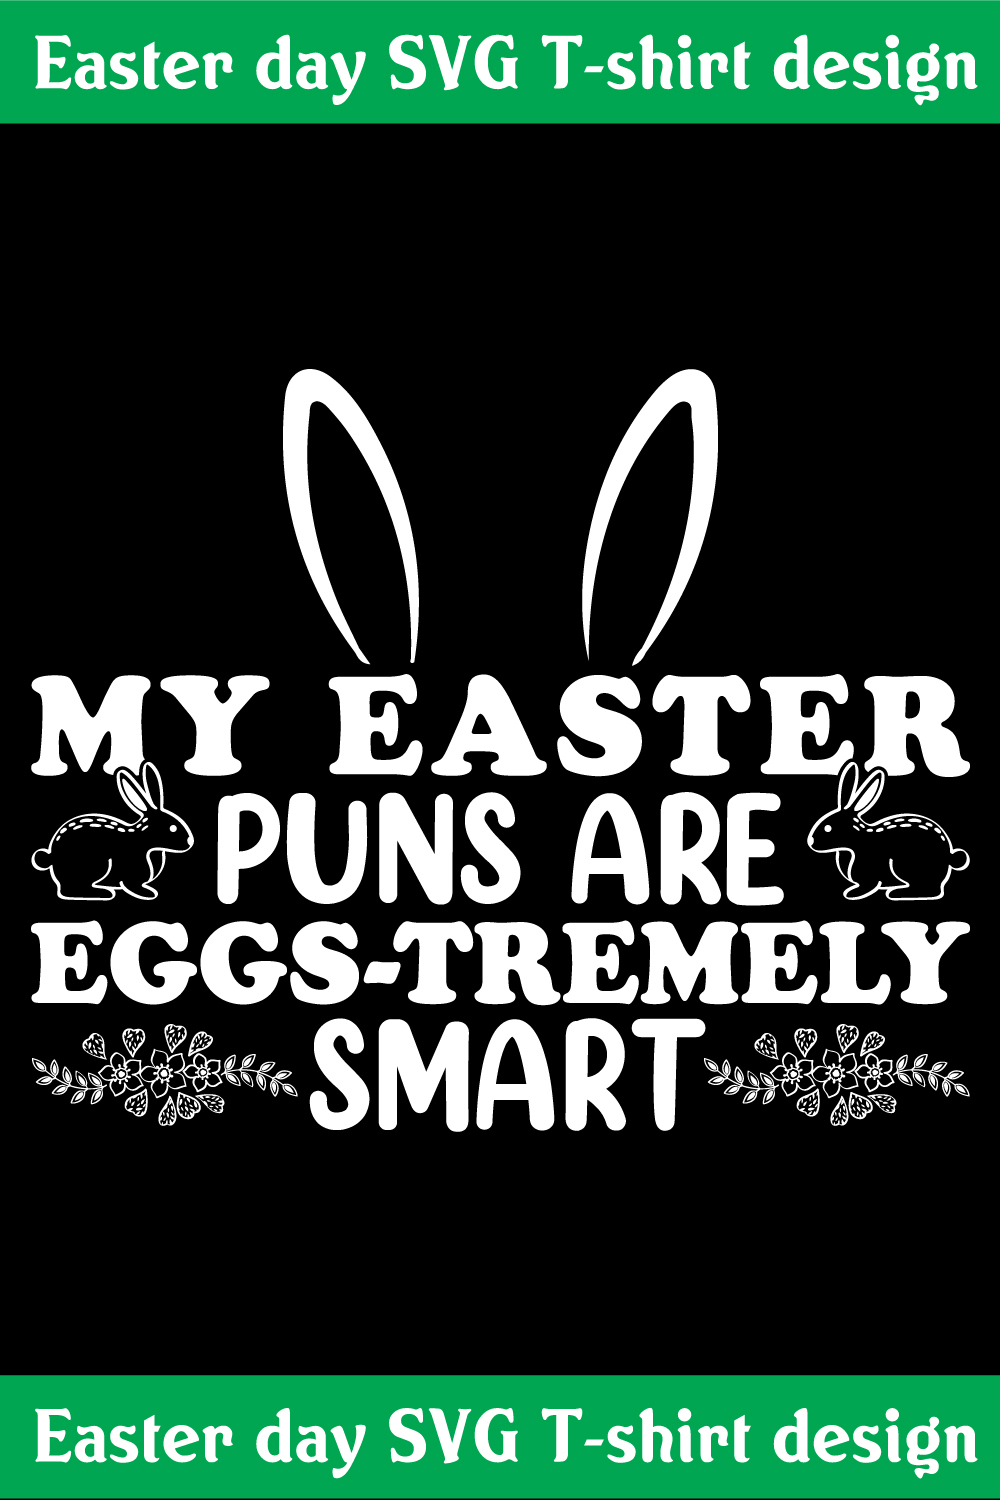 MY Easter puns are eggs tremely smart t-shirt design pinterest preview image.